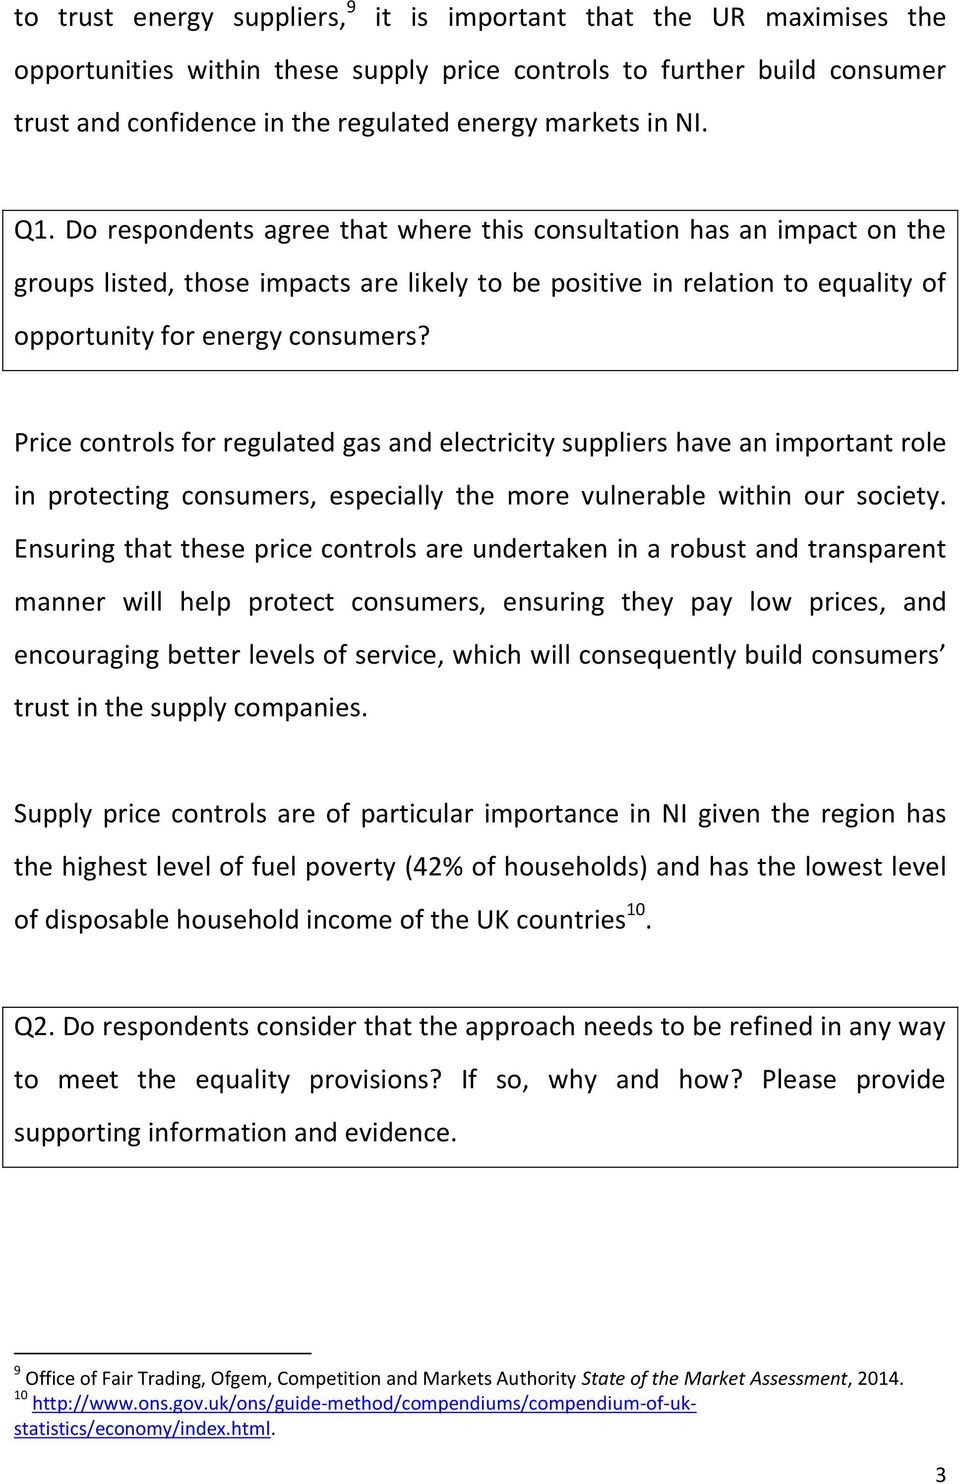 Price controls for regulated gas and electricity suppliers have an important role in protecting consumers, especially the more vulnerable within our society.